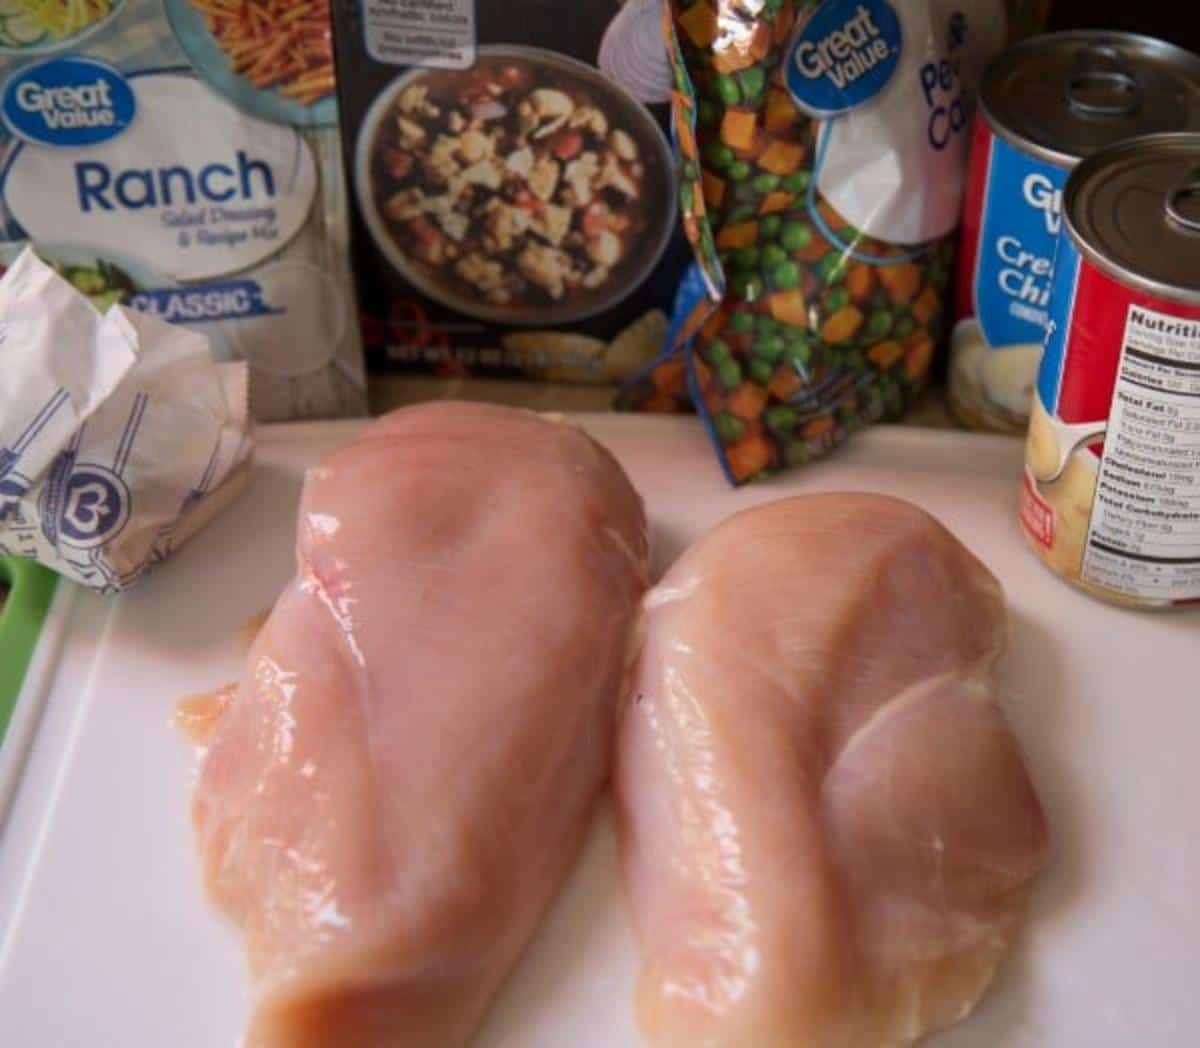 Raw chicken breasts, butter, ranch seasoning, broth, peas & carrots, and cream of chicken soup.